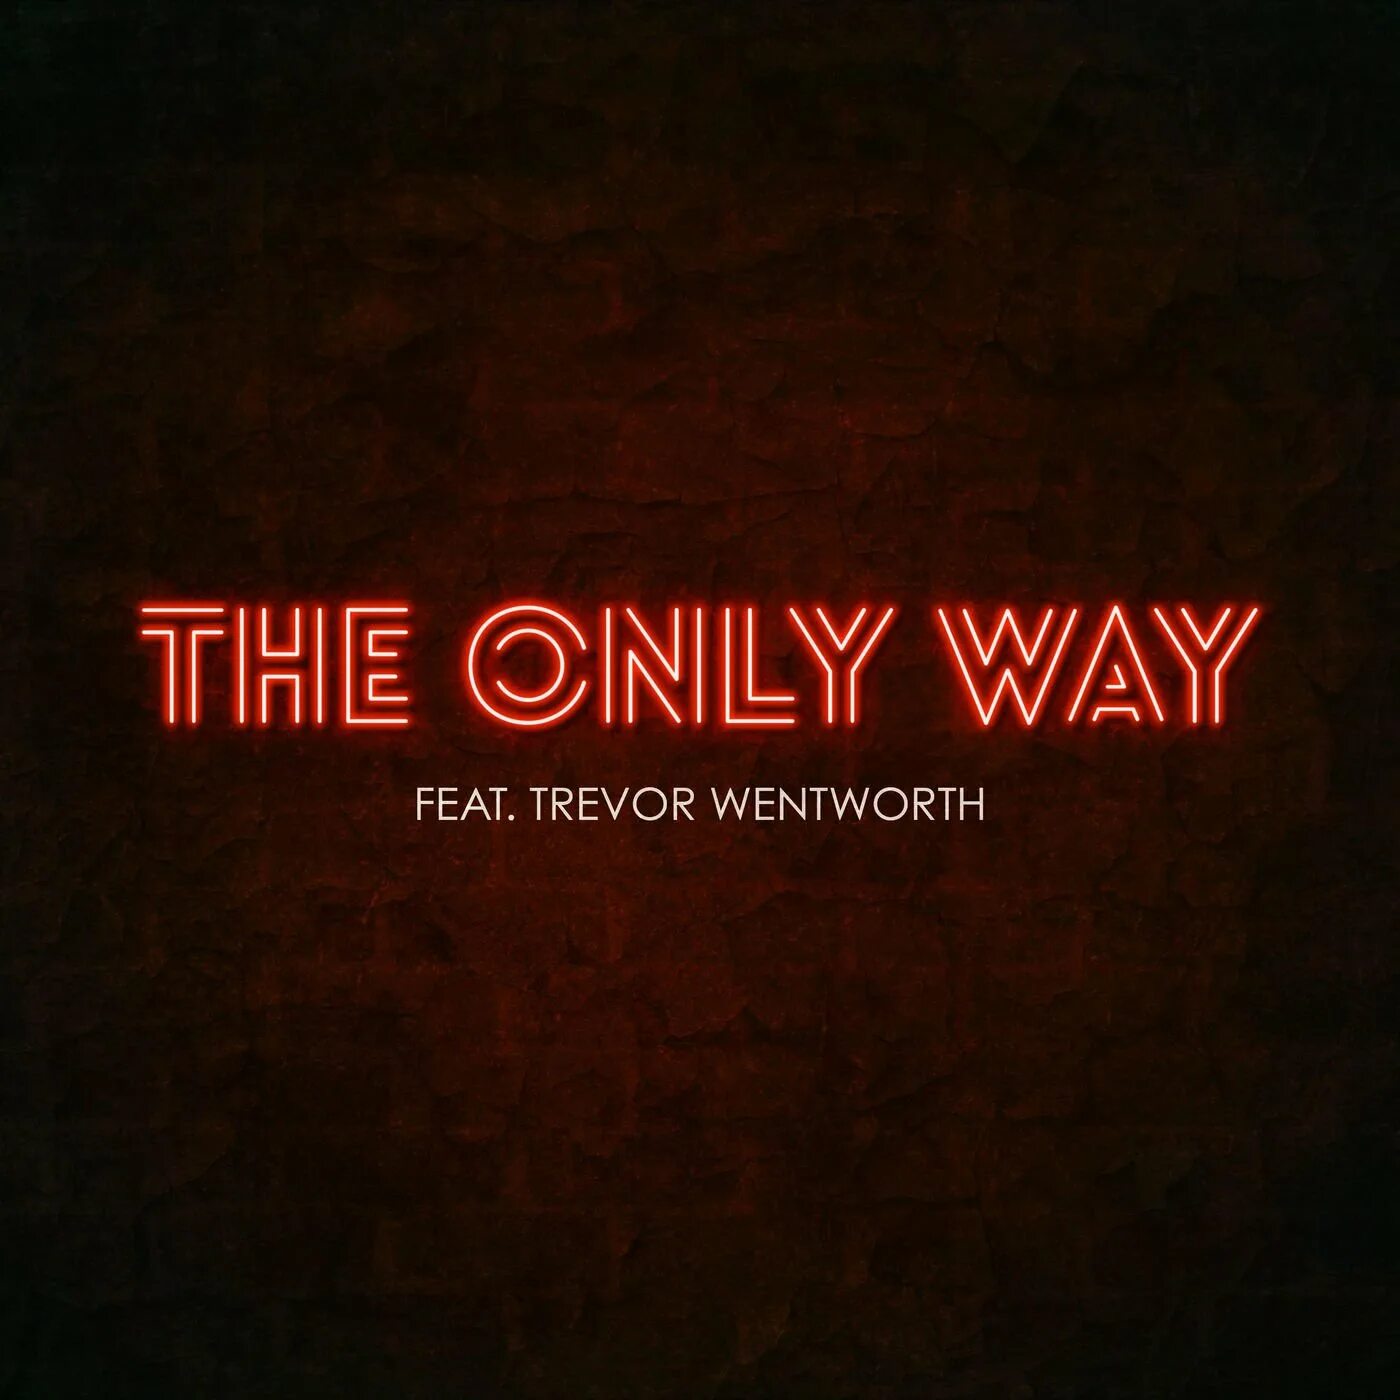 The only way. Fear and Wonder. Only. Обложка песни the only. The only way we